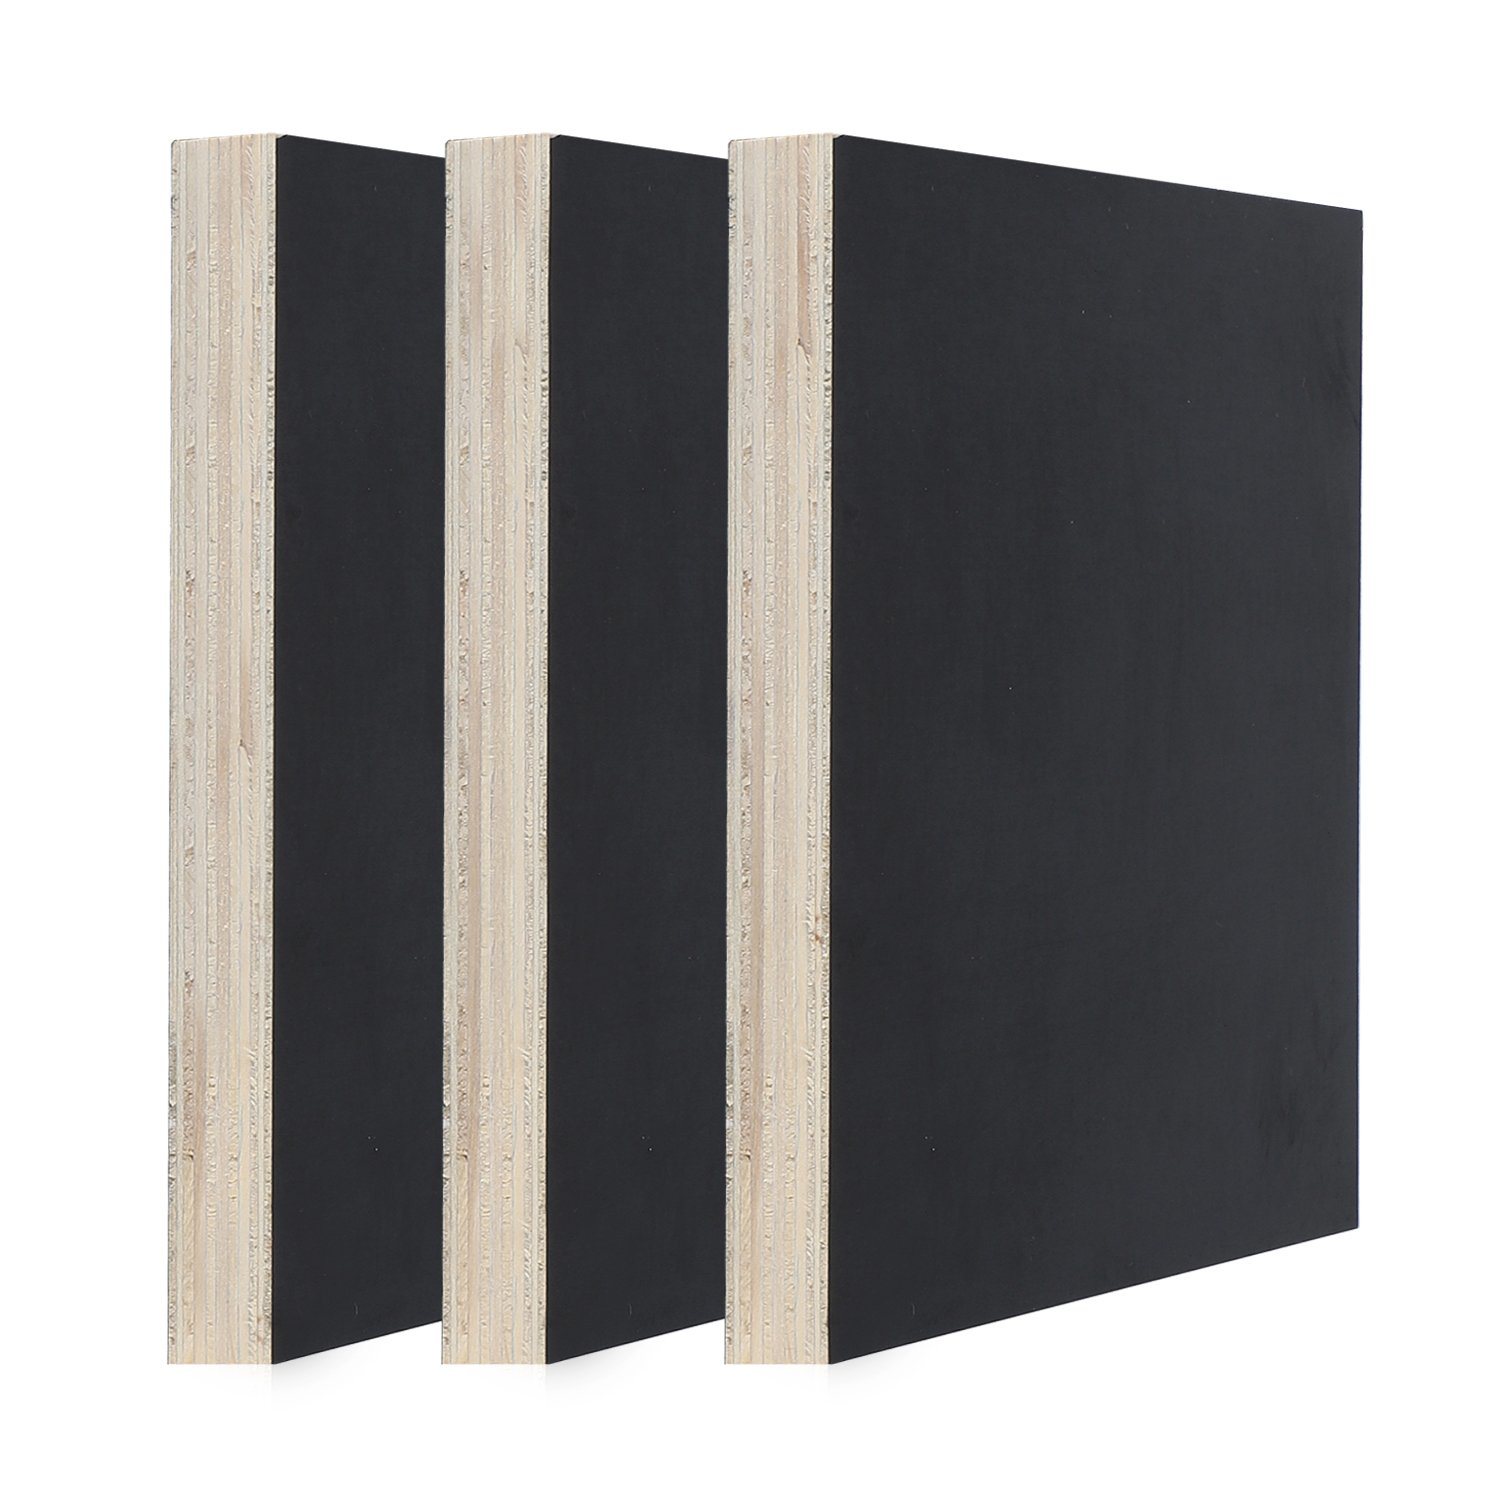 Black Film Faced Plywood Building Timber Concrete Shuttering Plywood